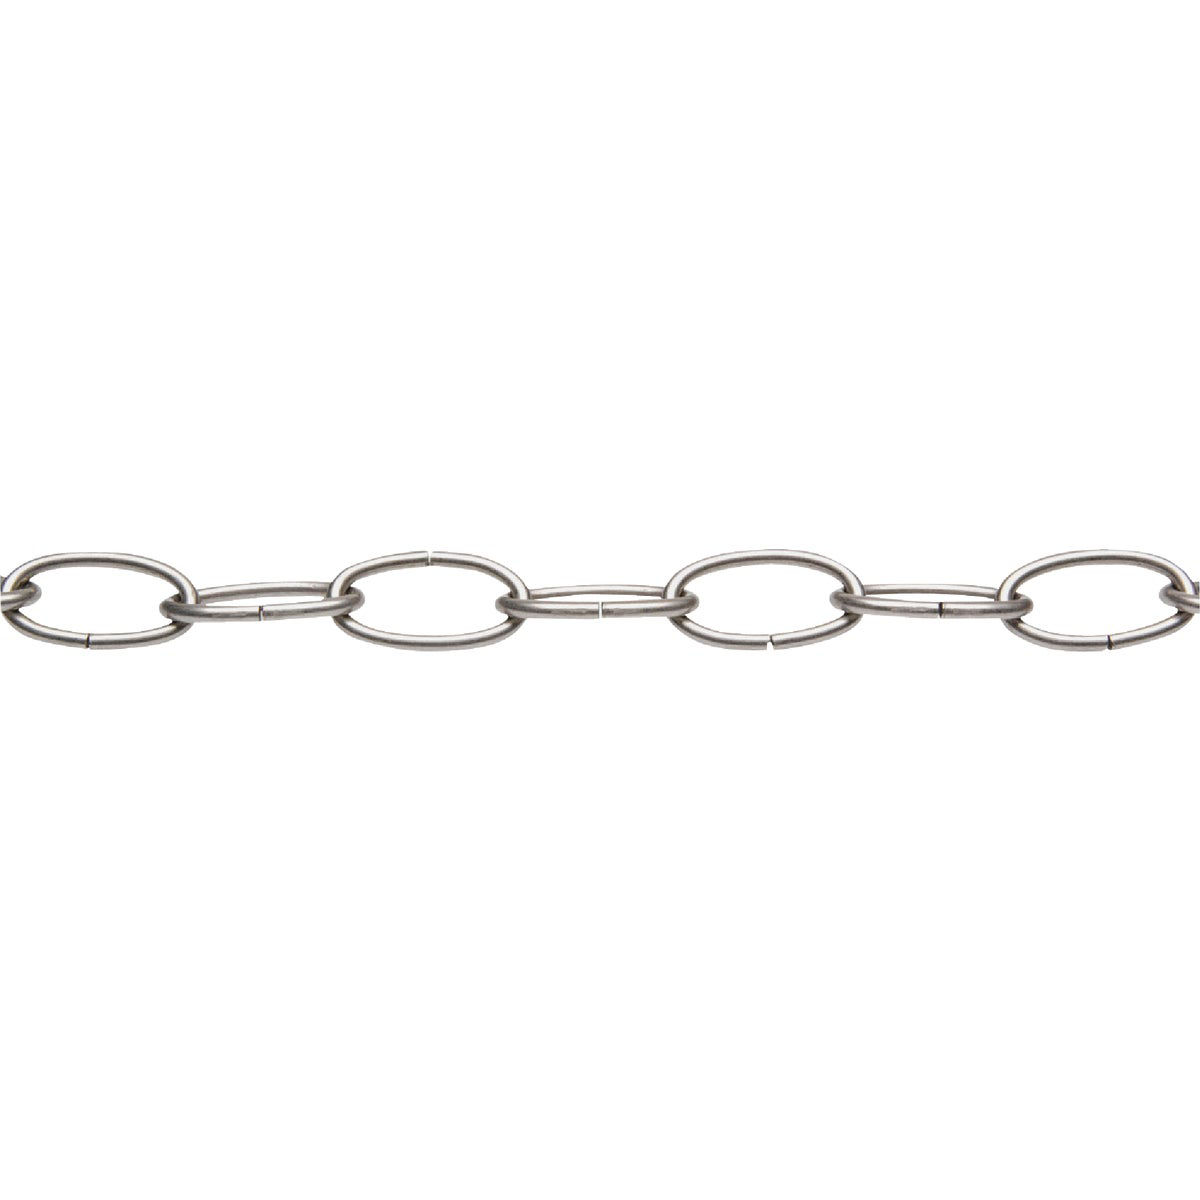 Campbell #10 40 Ft. Brushed Nickel Finished Metal Craft Chain